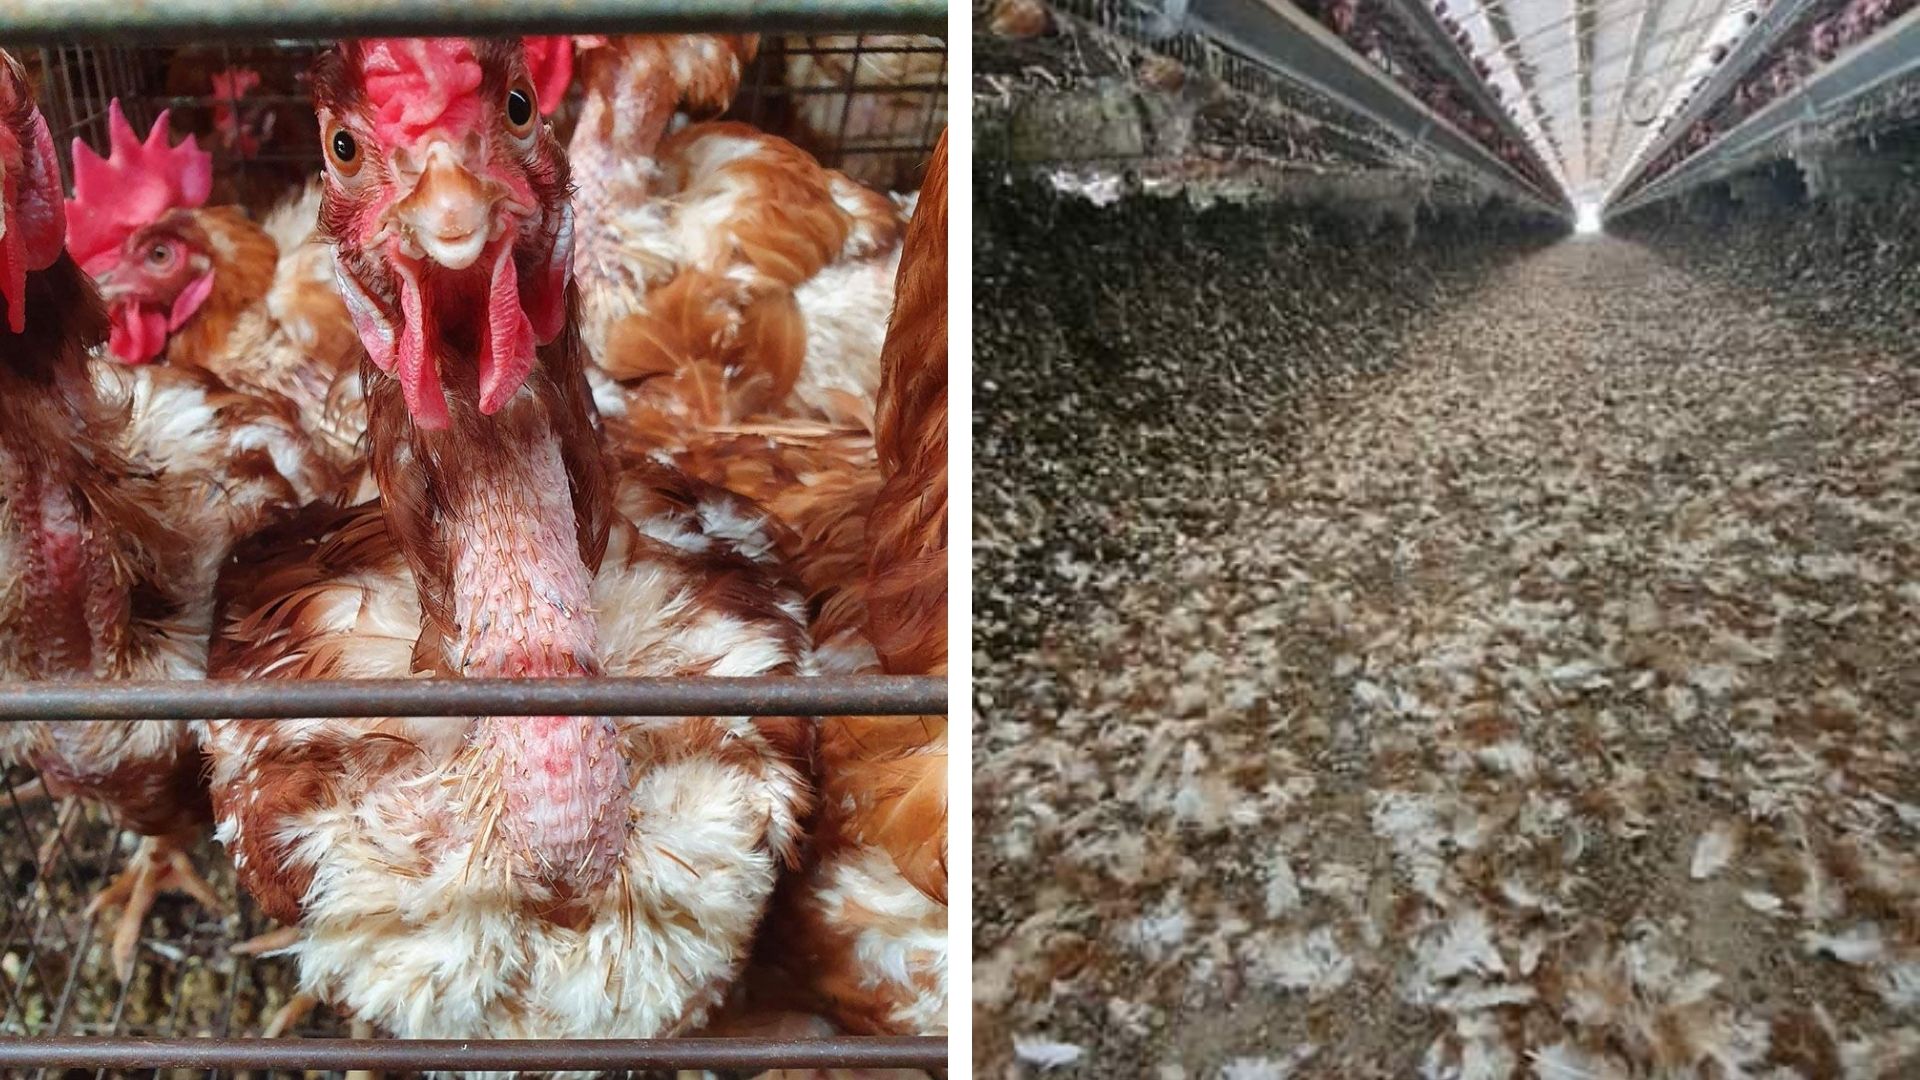 On the left, Chickens in cages at Williams Eggs and on the right, a filthy floor covered in feathers at Williams Eggs.